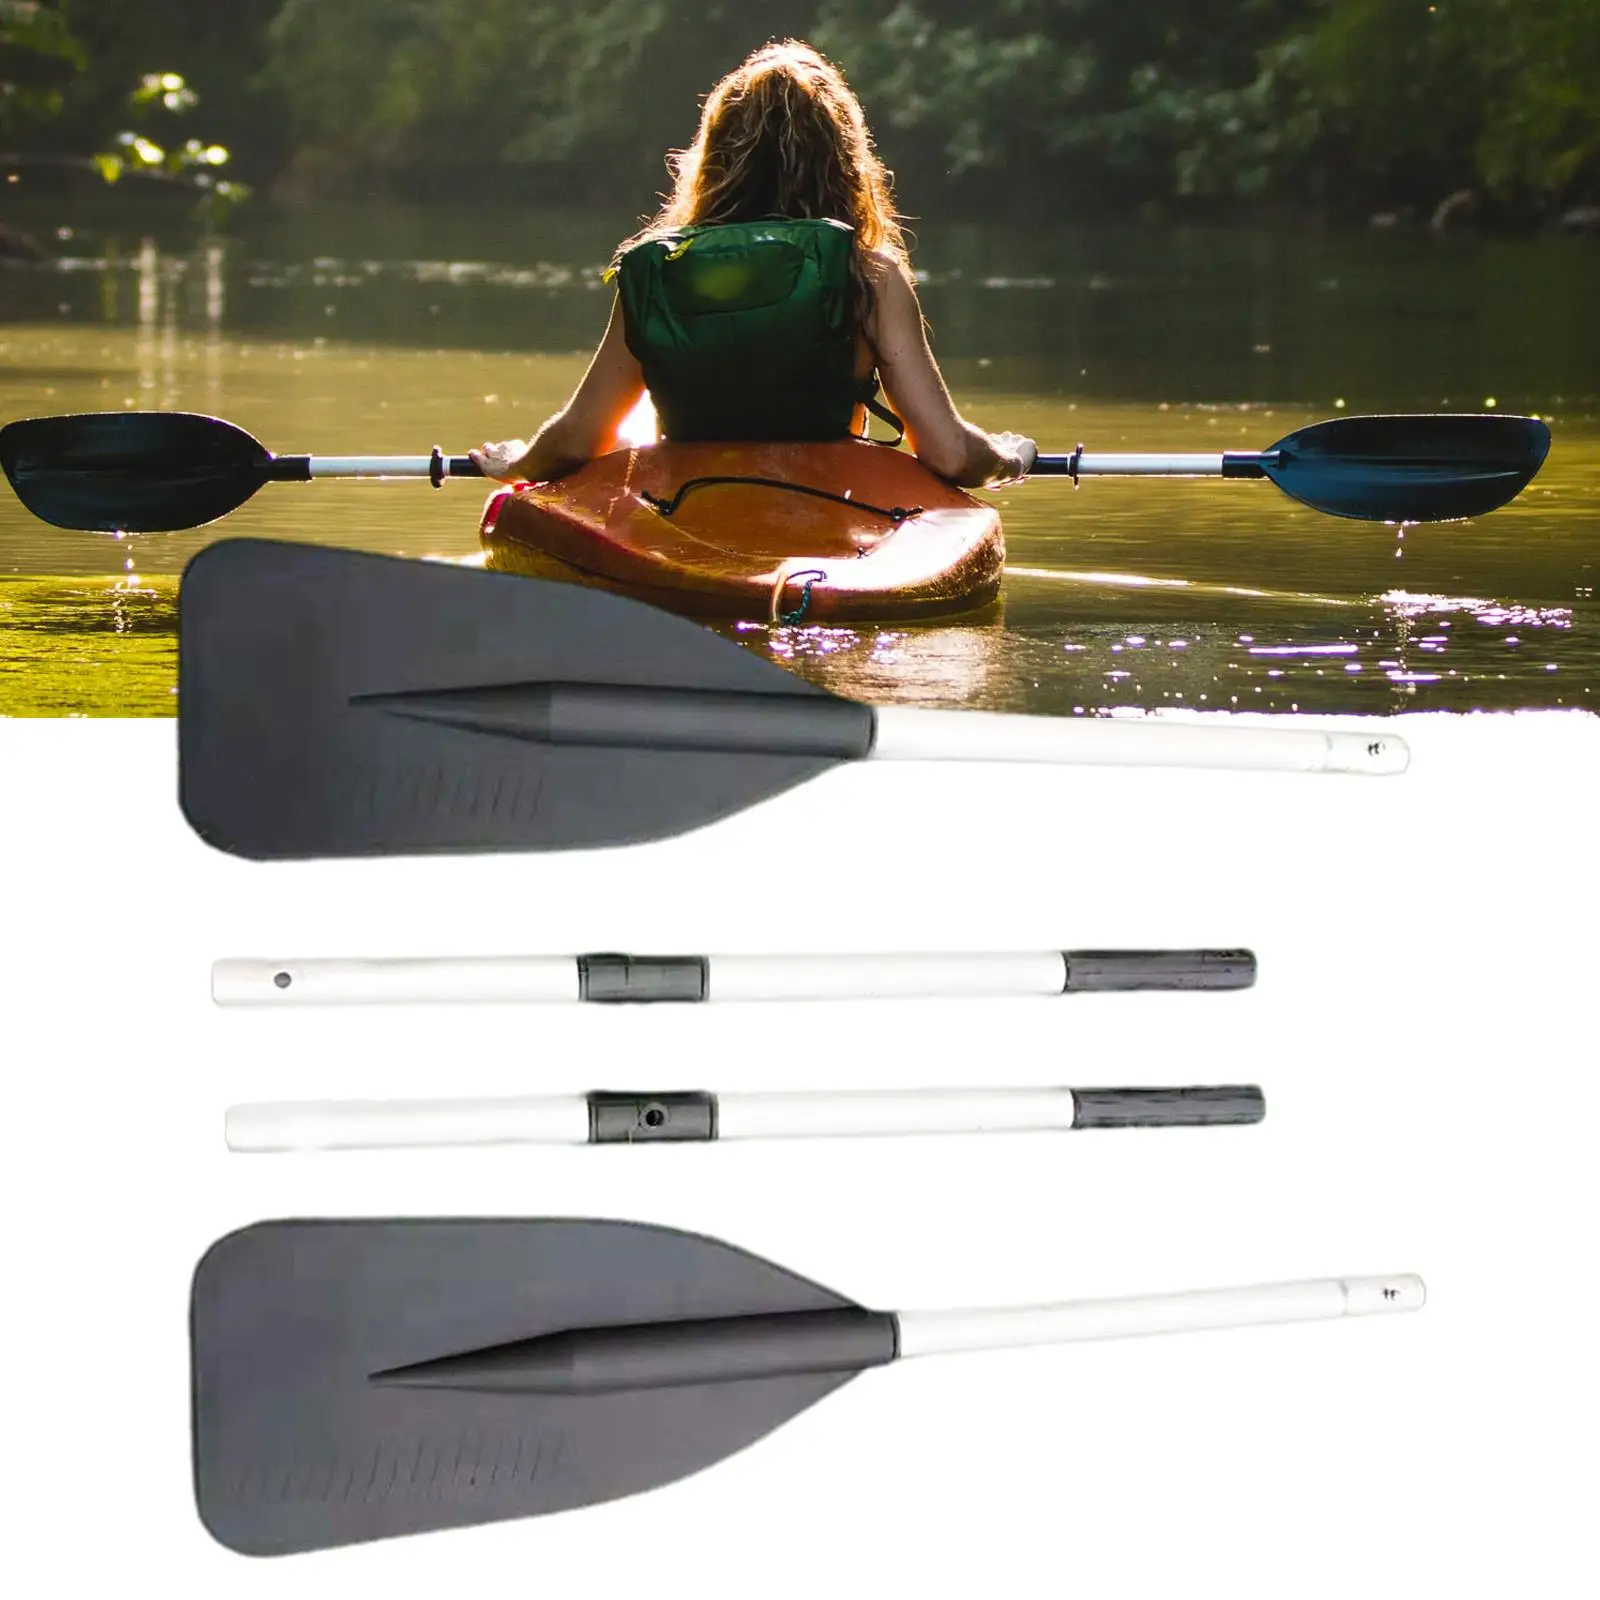 2Pcs Kayak Paddle Removable Accessories Portable Lightweight Packable for Stand up Boat Surfing Canoeing Paddleboard Surfboard